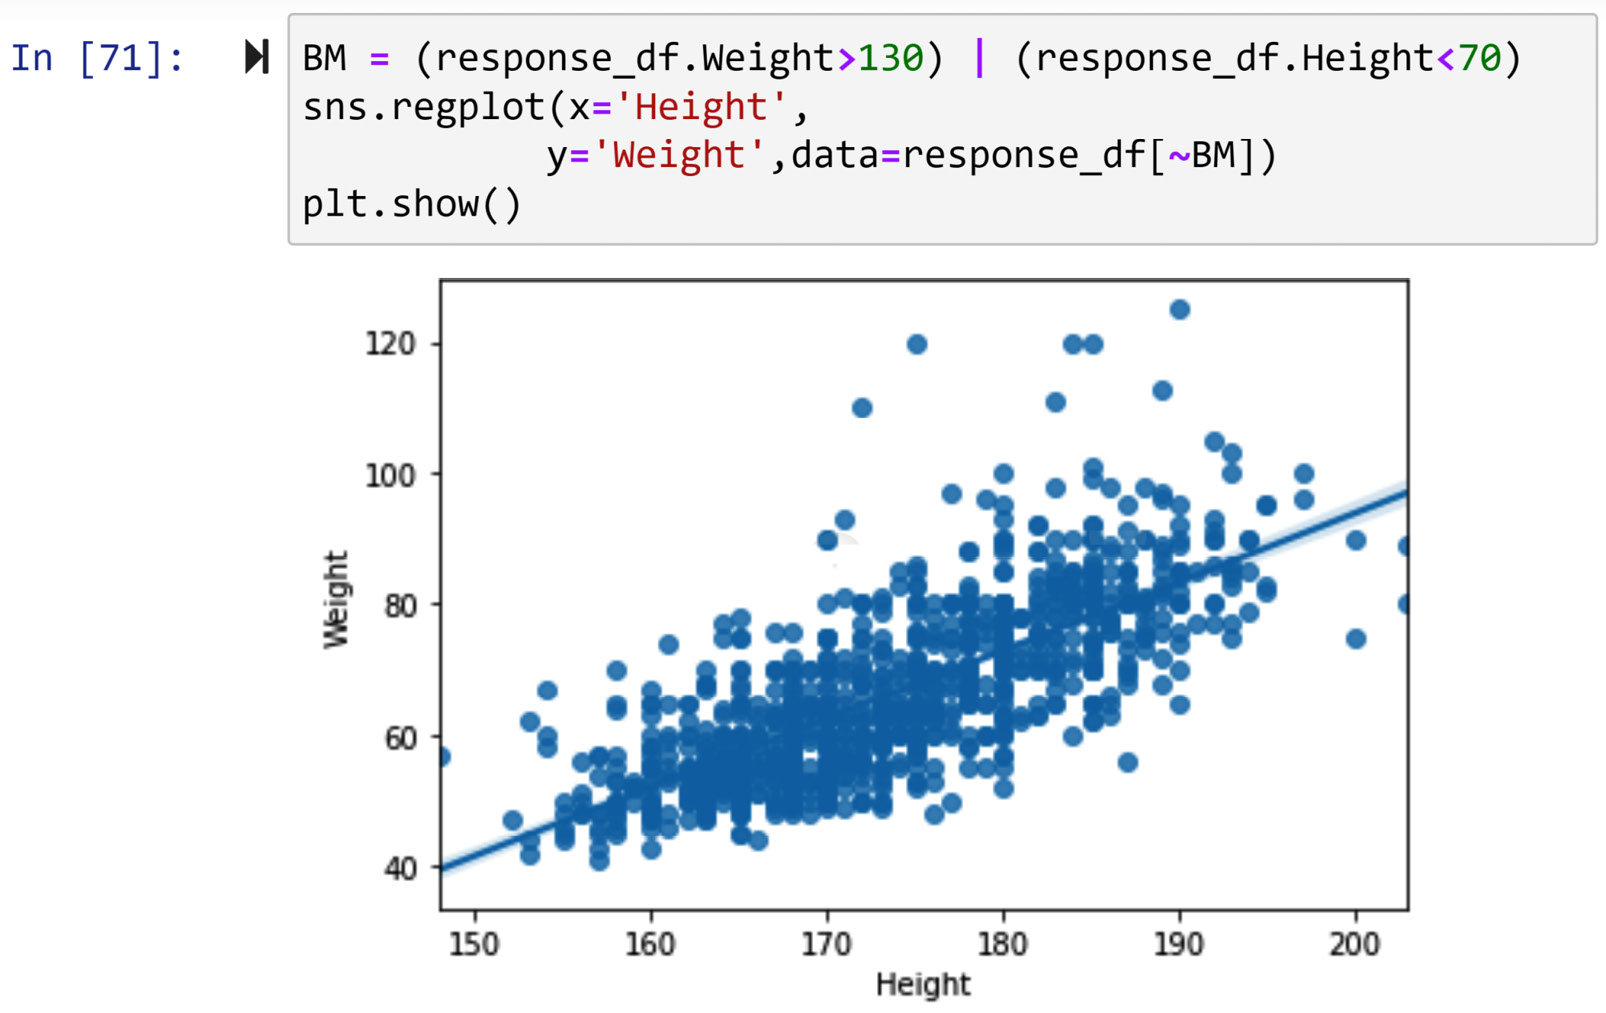 Figure 11.28 – Scatterplot to visualize the relationship between response_df.Height and response_df.Weight after dealing with outliers 
